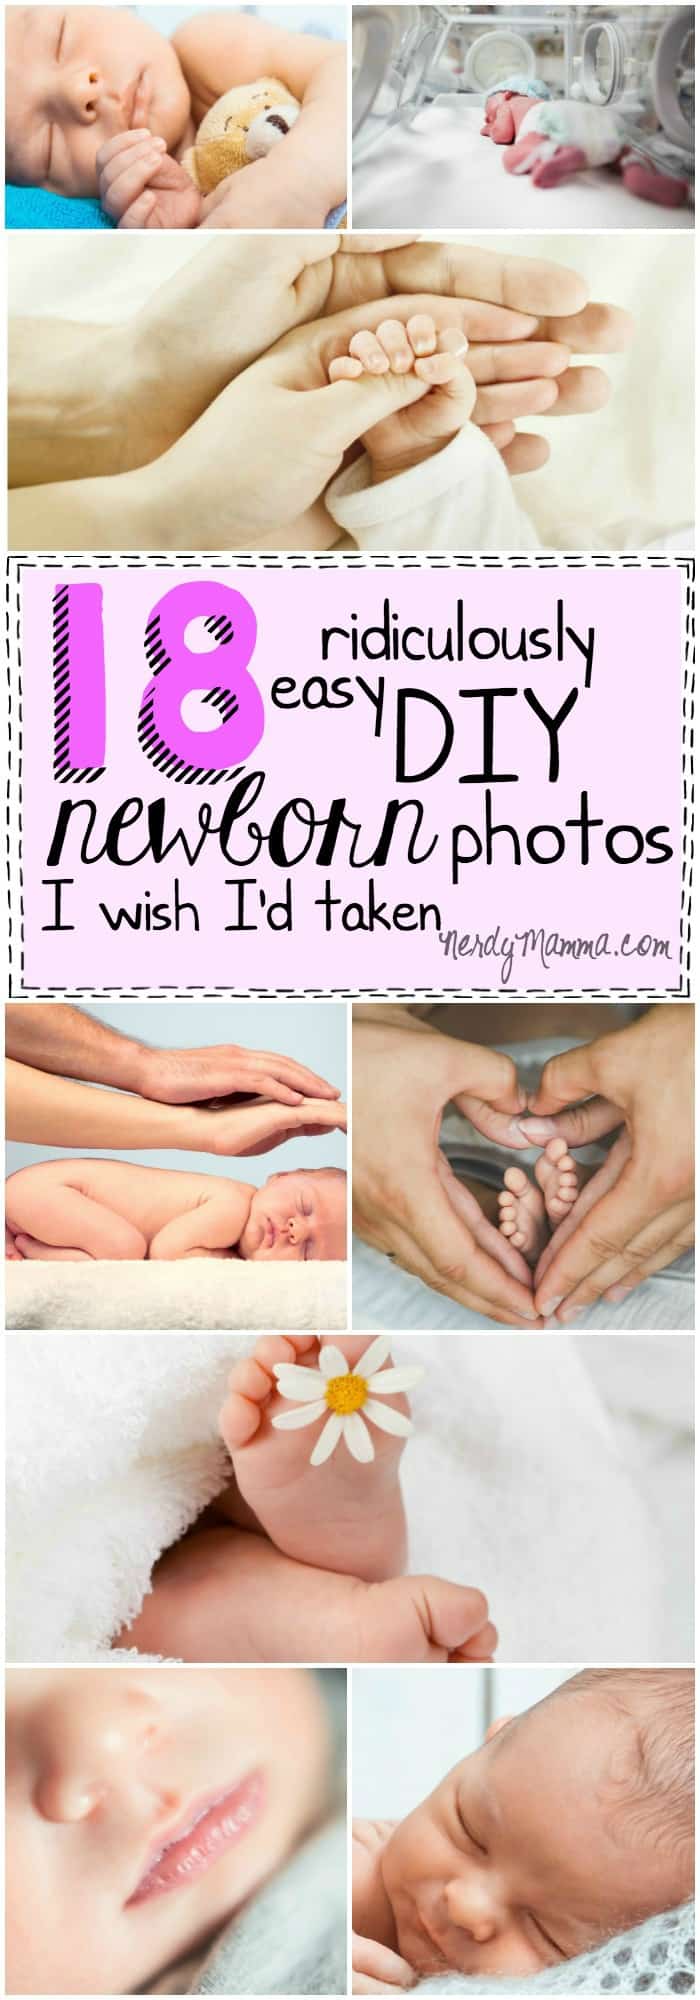 I love these easy ideas for taking baby photos at home! I wish I'd done every one of them, too!